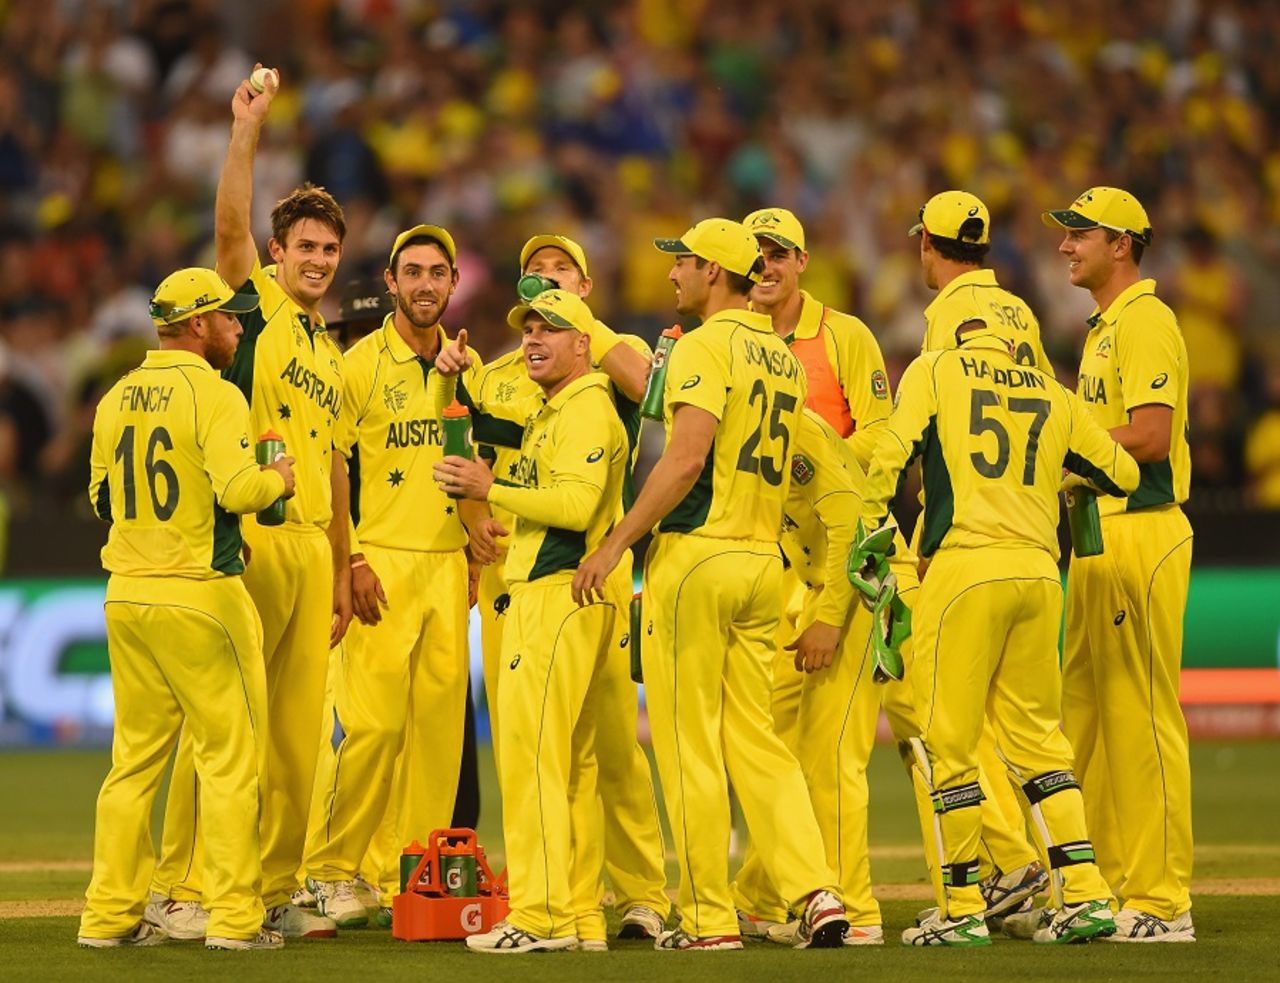 Mitchell Marsh acknowledges the crowd after claiming his fifth wicket, Australia v England, Group A, World Cup 2015, Melbourne, February 14, 2015